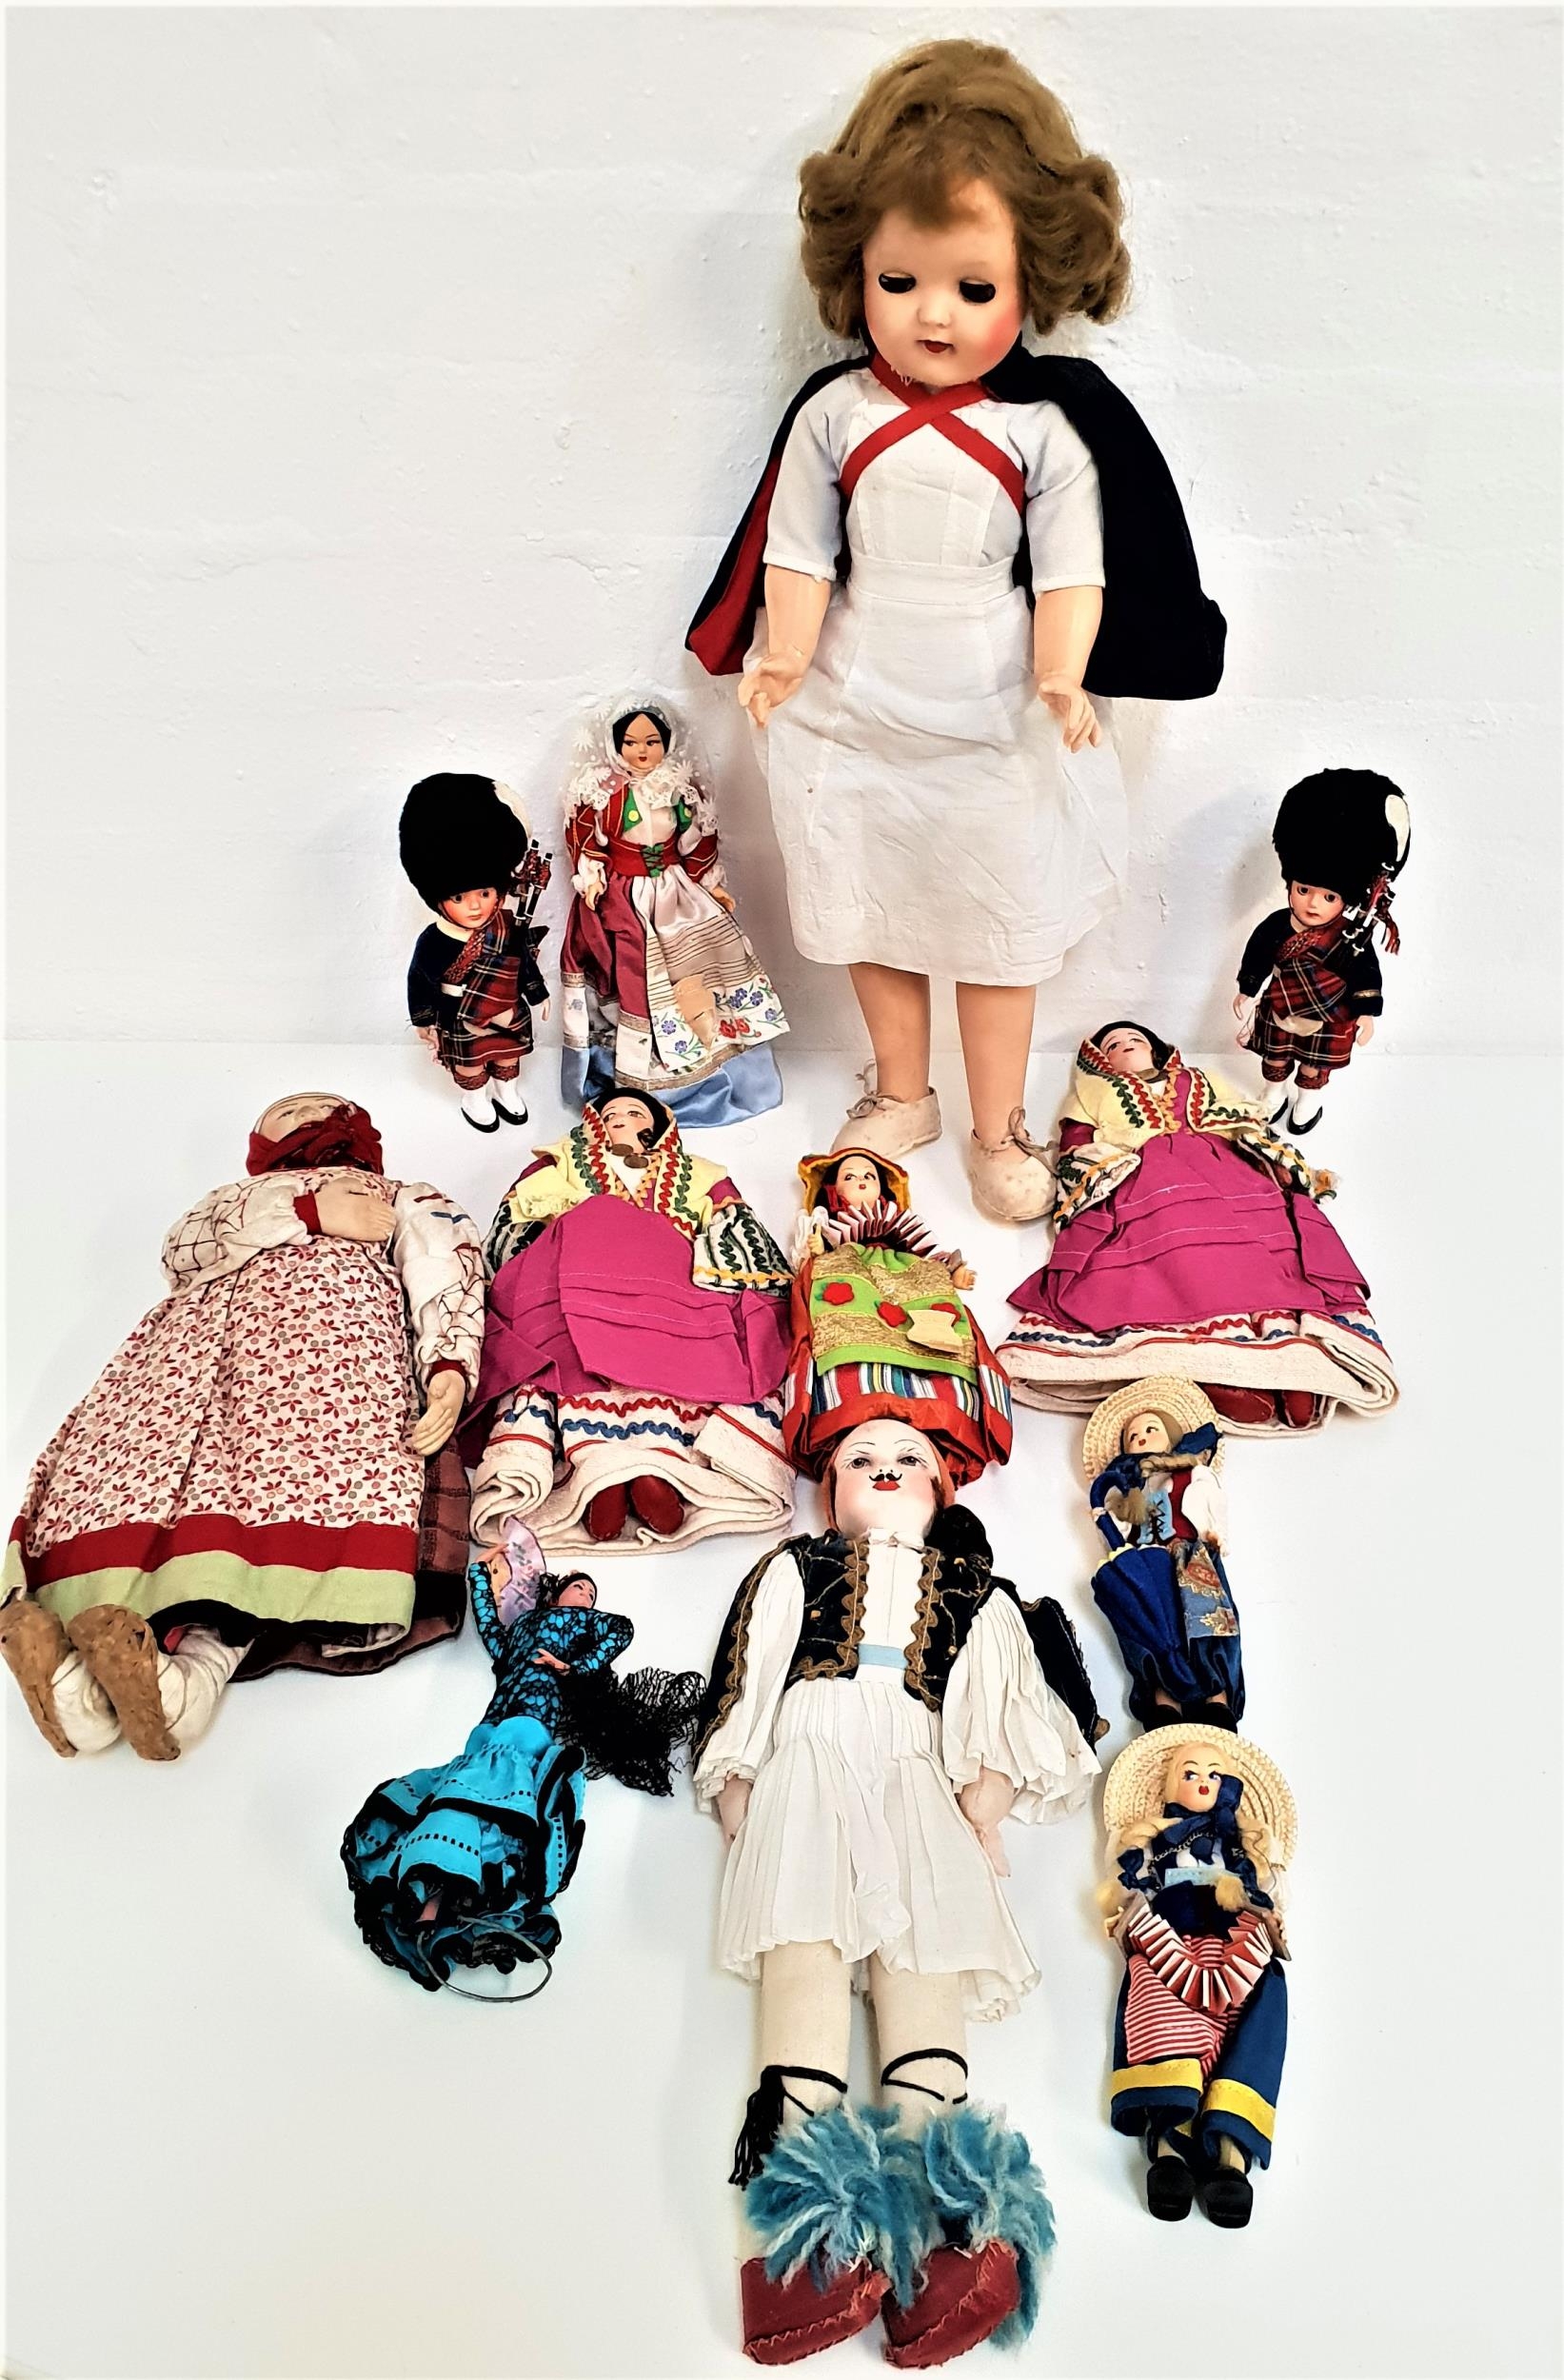 SELECTION OF WORLD DOLLS some with porcelain heads and in traditional dress, with examples from